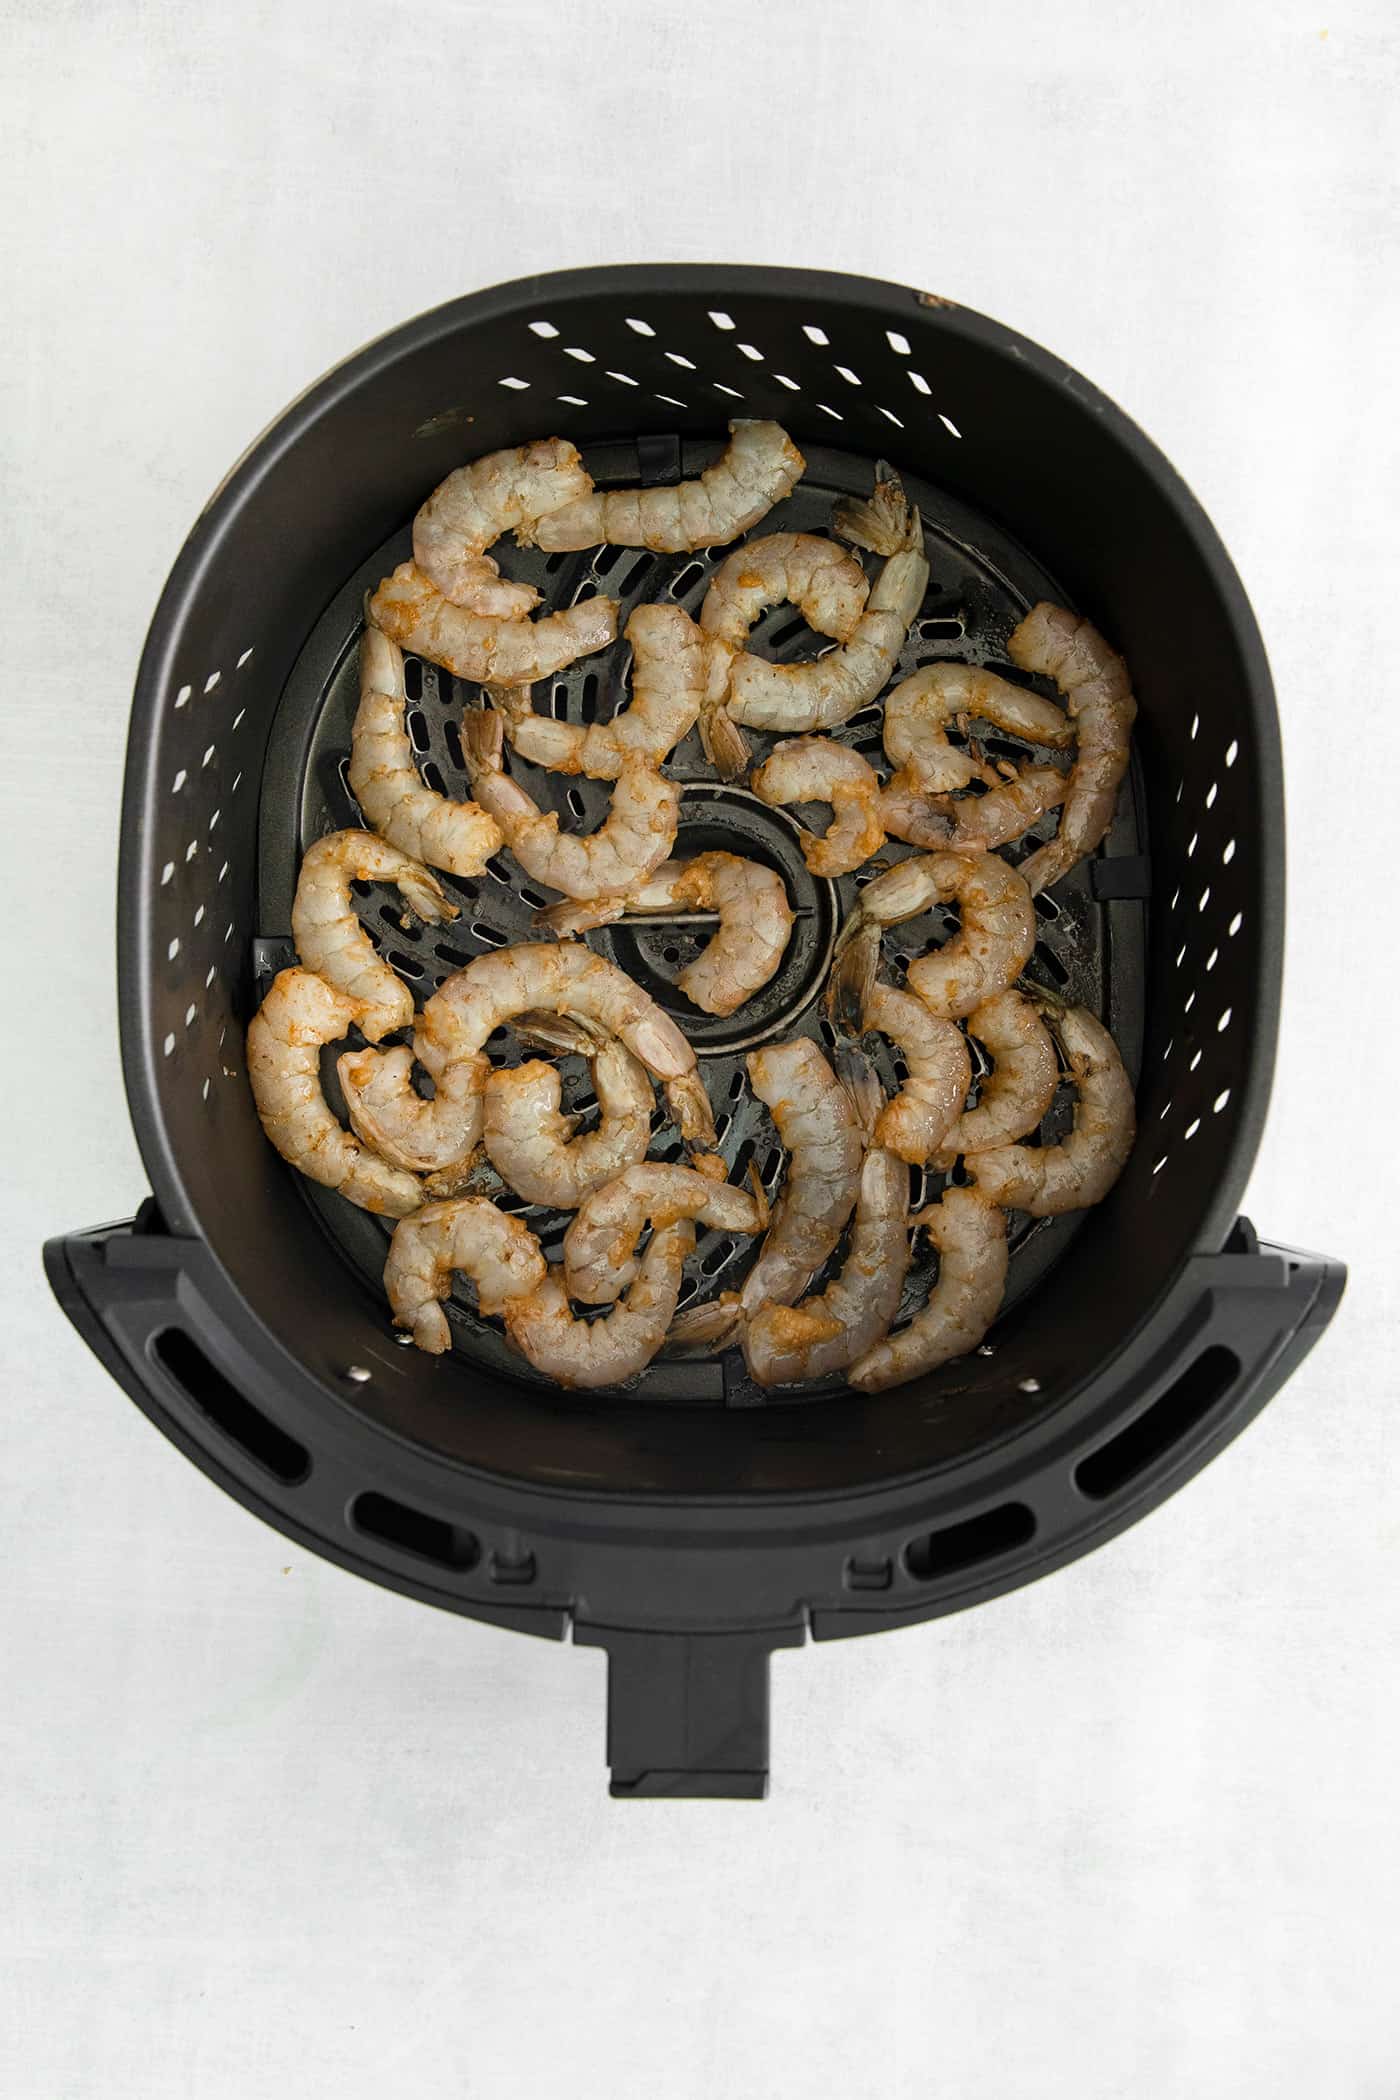 Raw shrimp in the air fryer